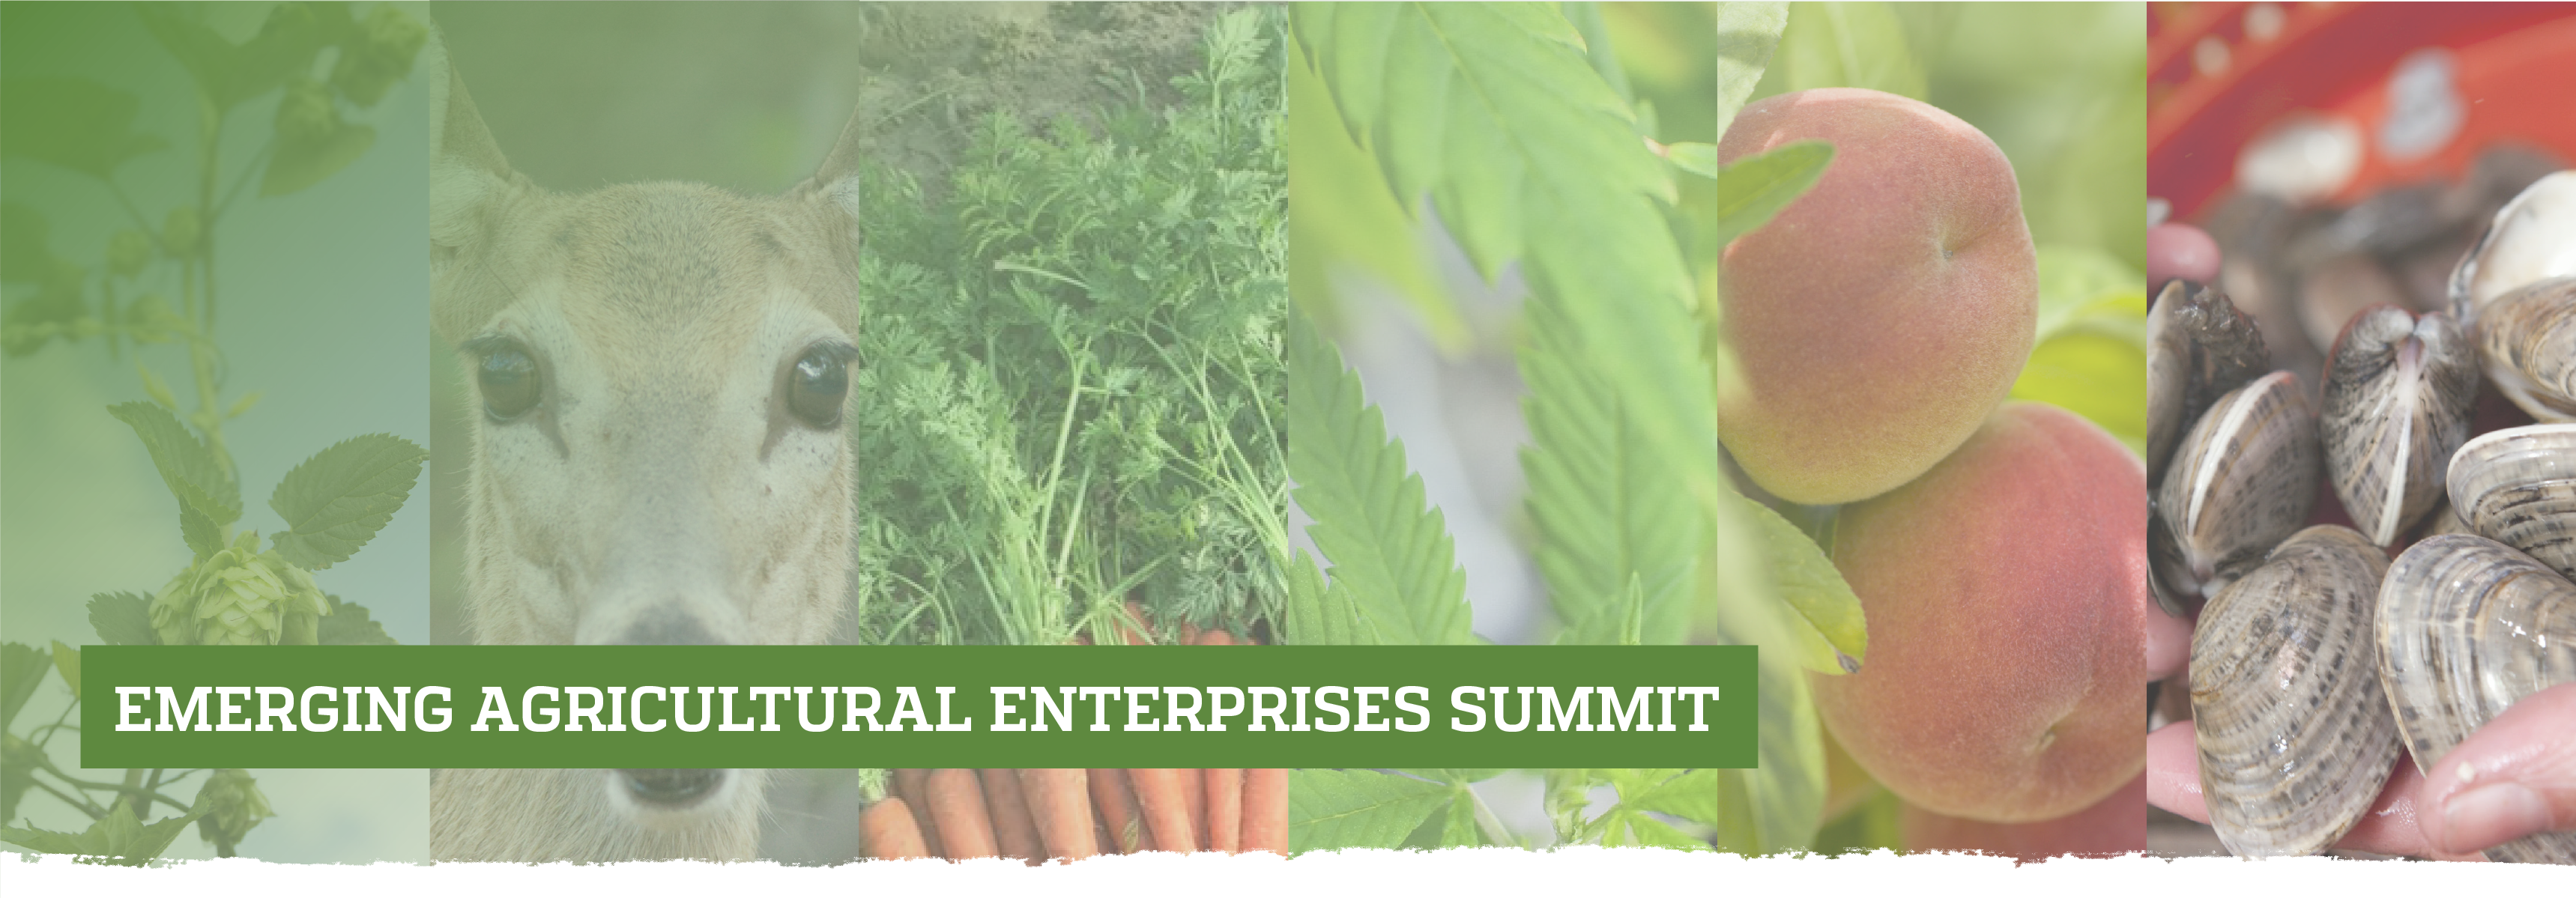 Emerging Agricultural Enterprises Summit showing hops, deer, carrots, hemp, peaches and oysters